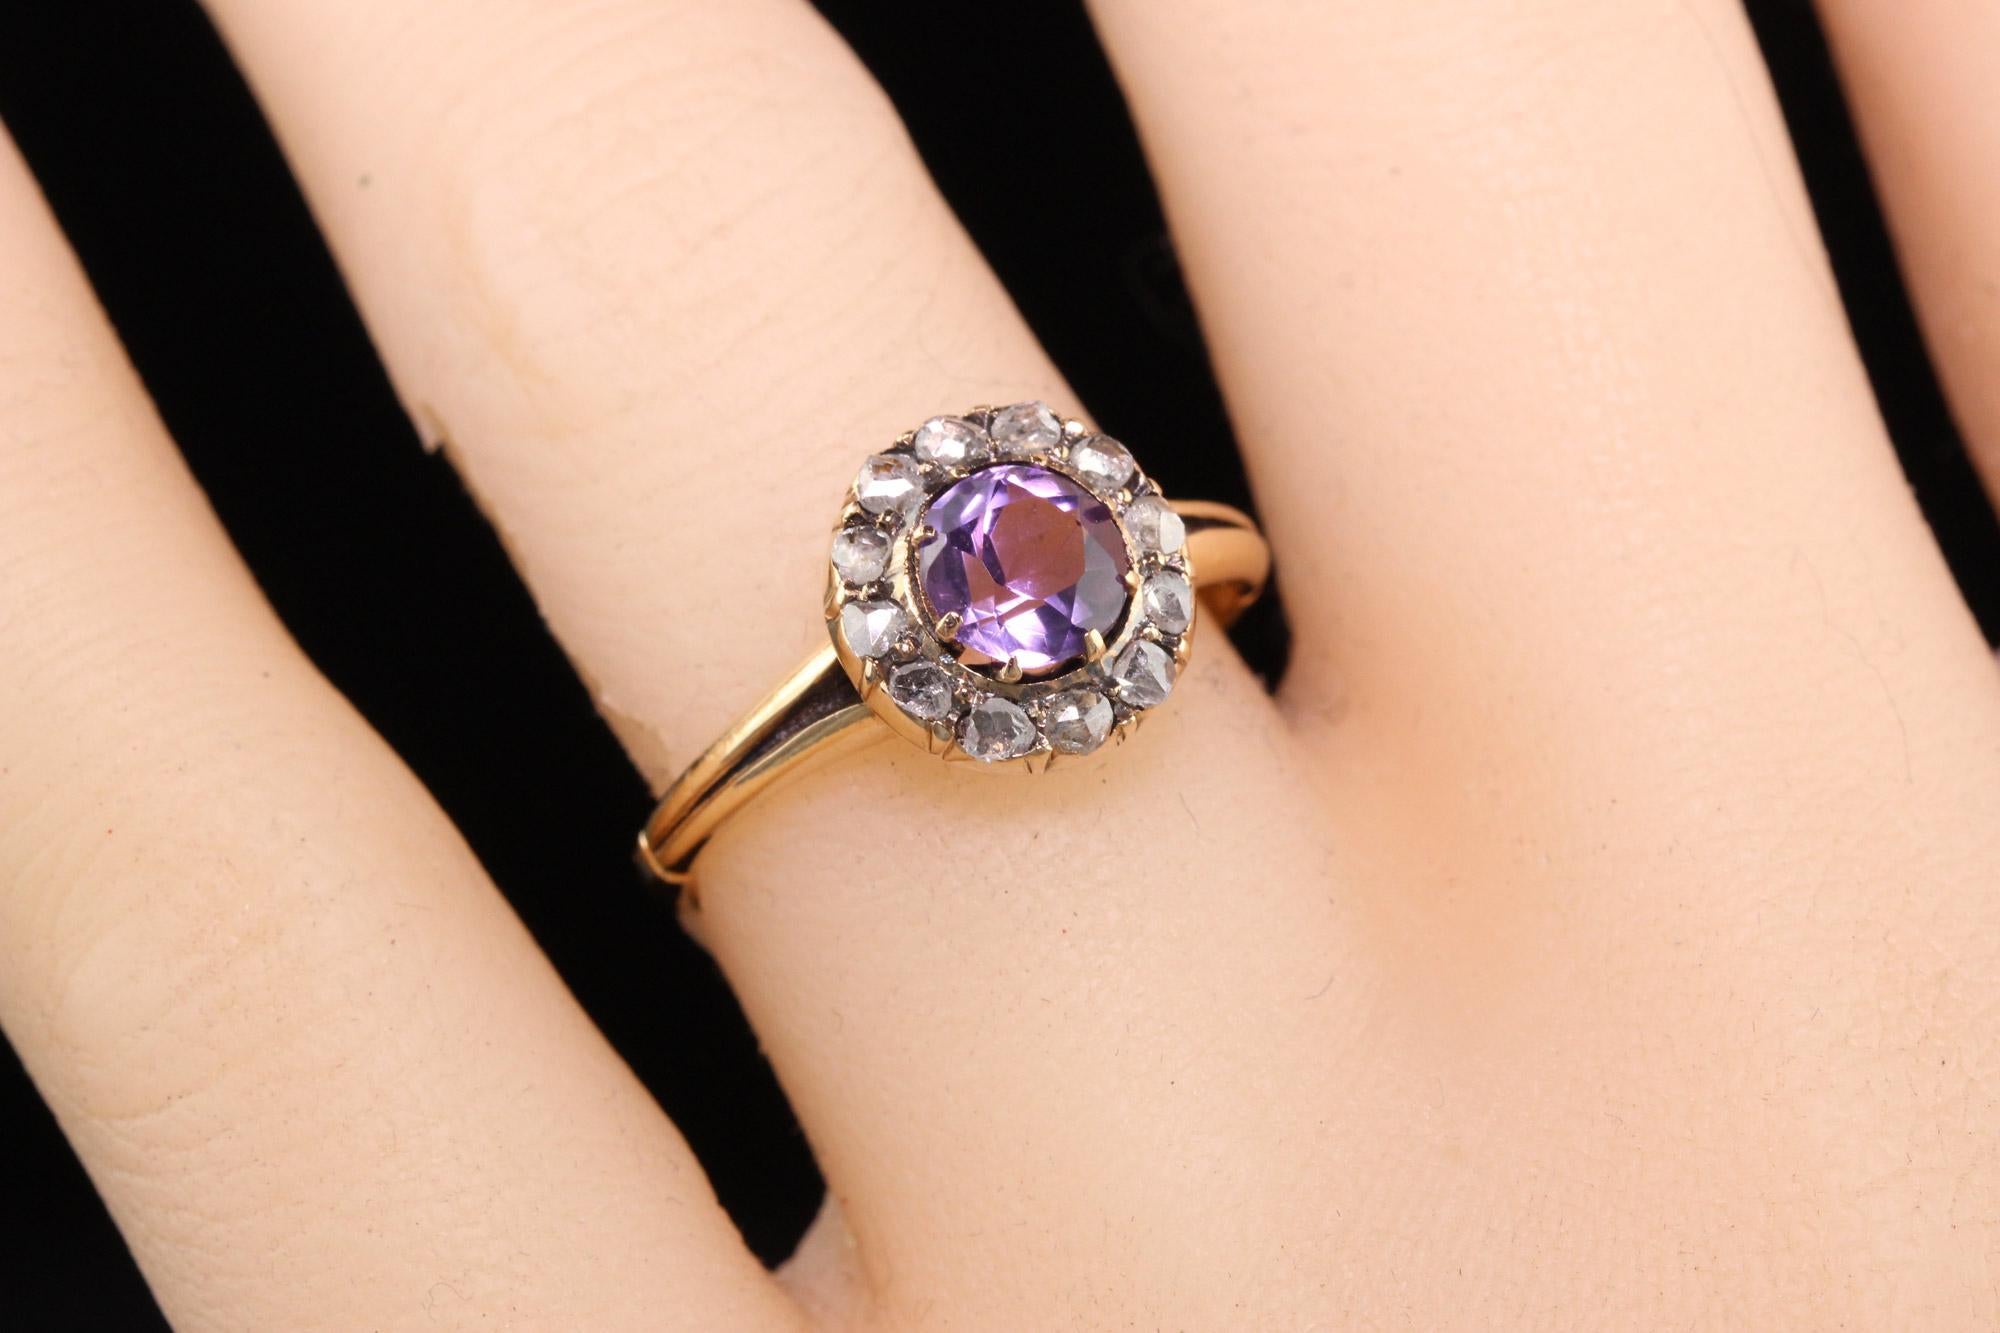 Women's Antique Victorian 14K Yellow Gold Rose Cut Diamond Amethyst Engagement Ring For Sale